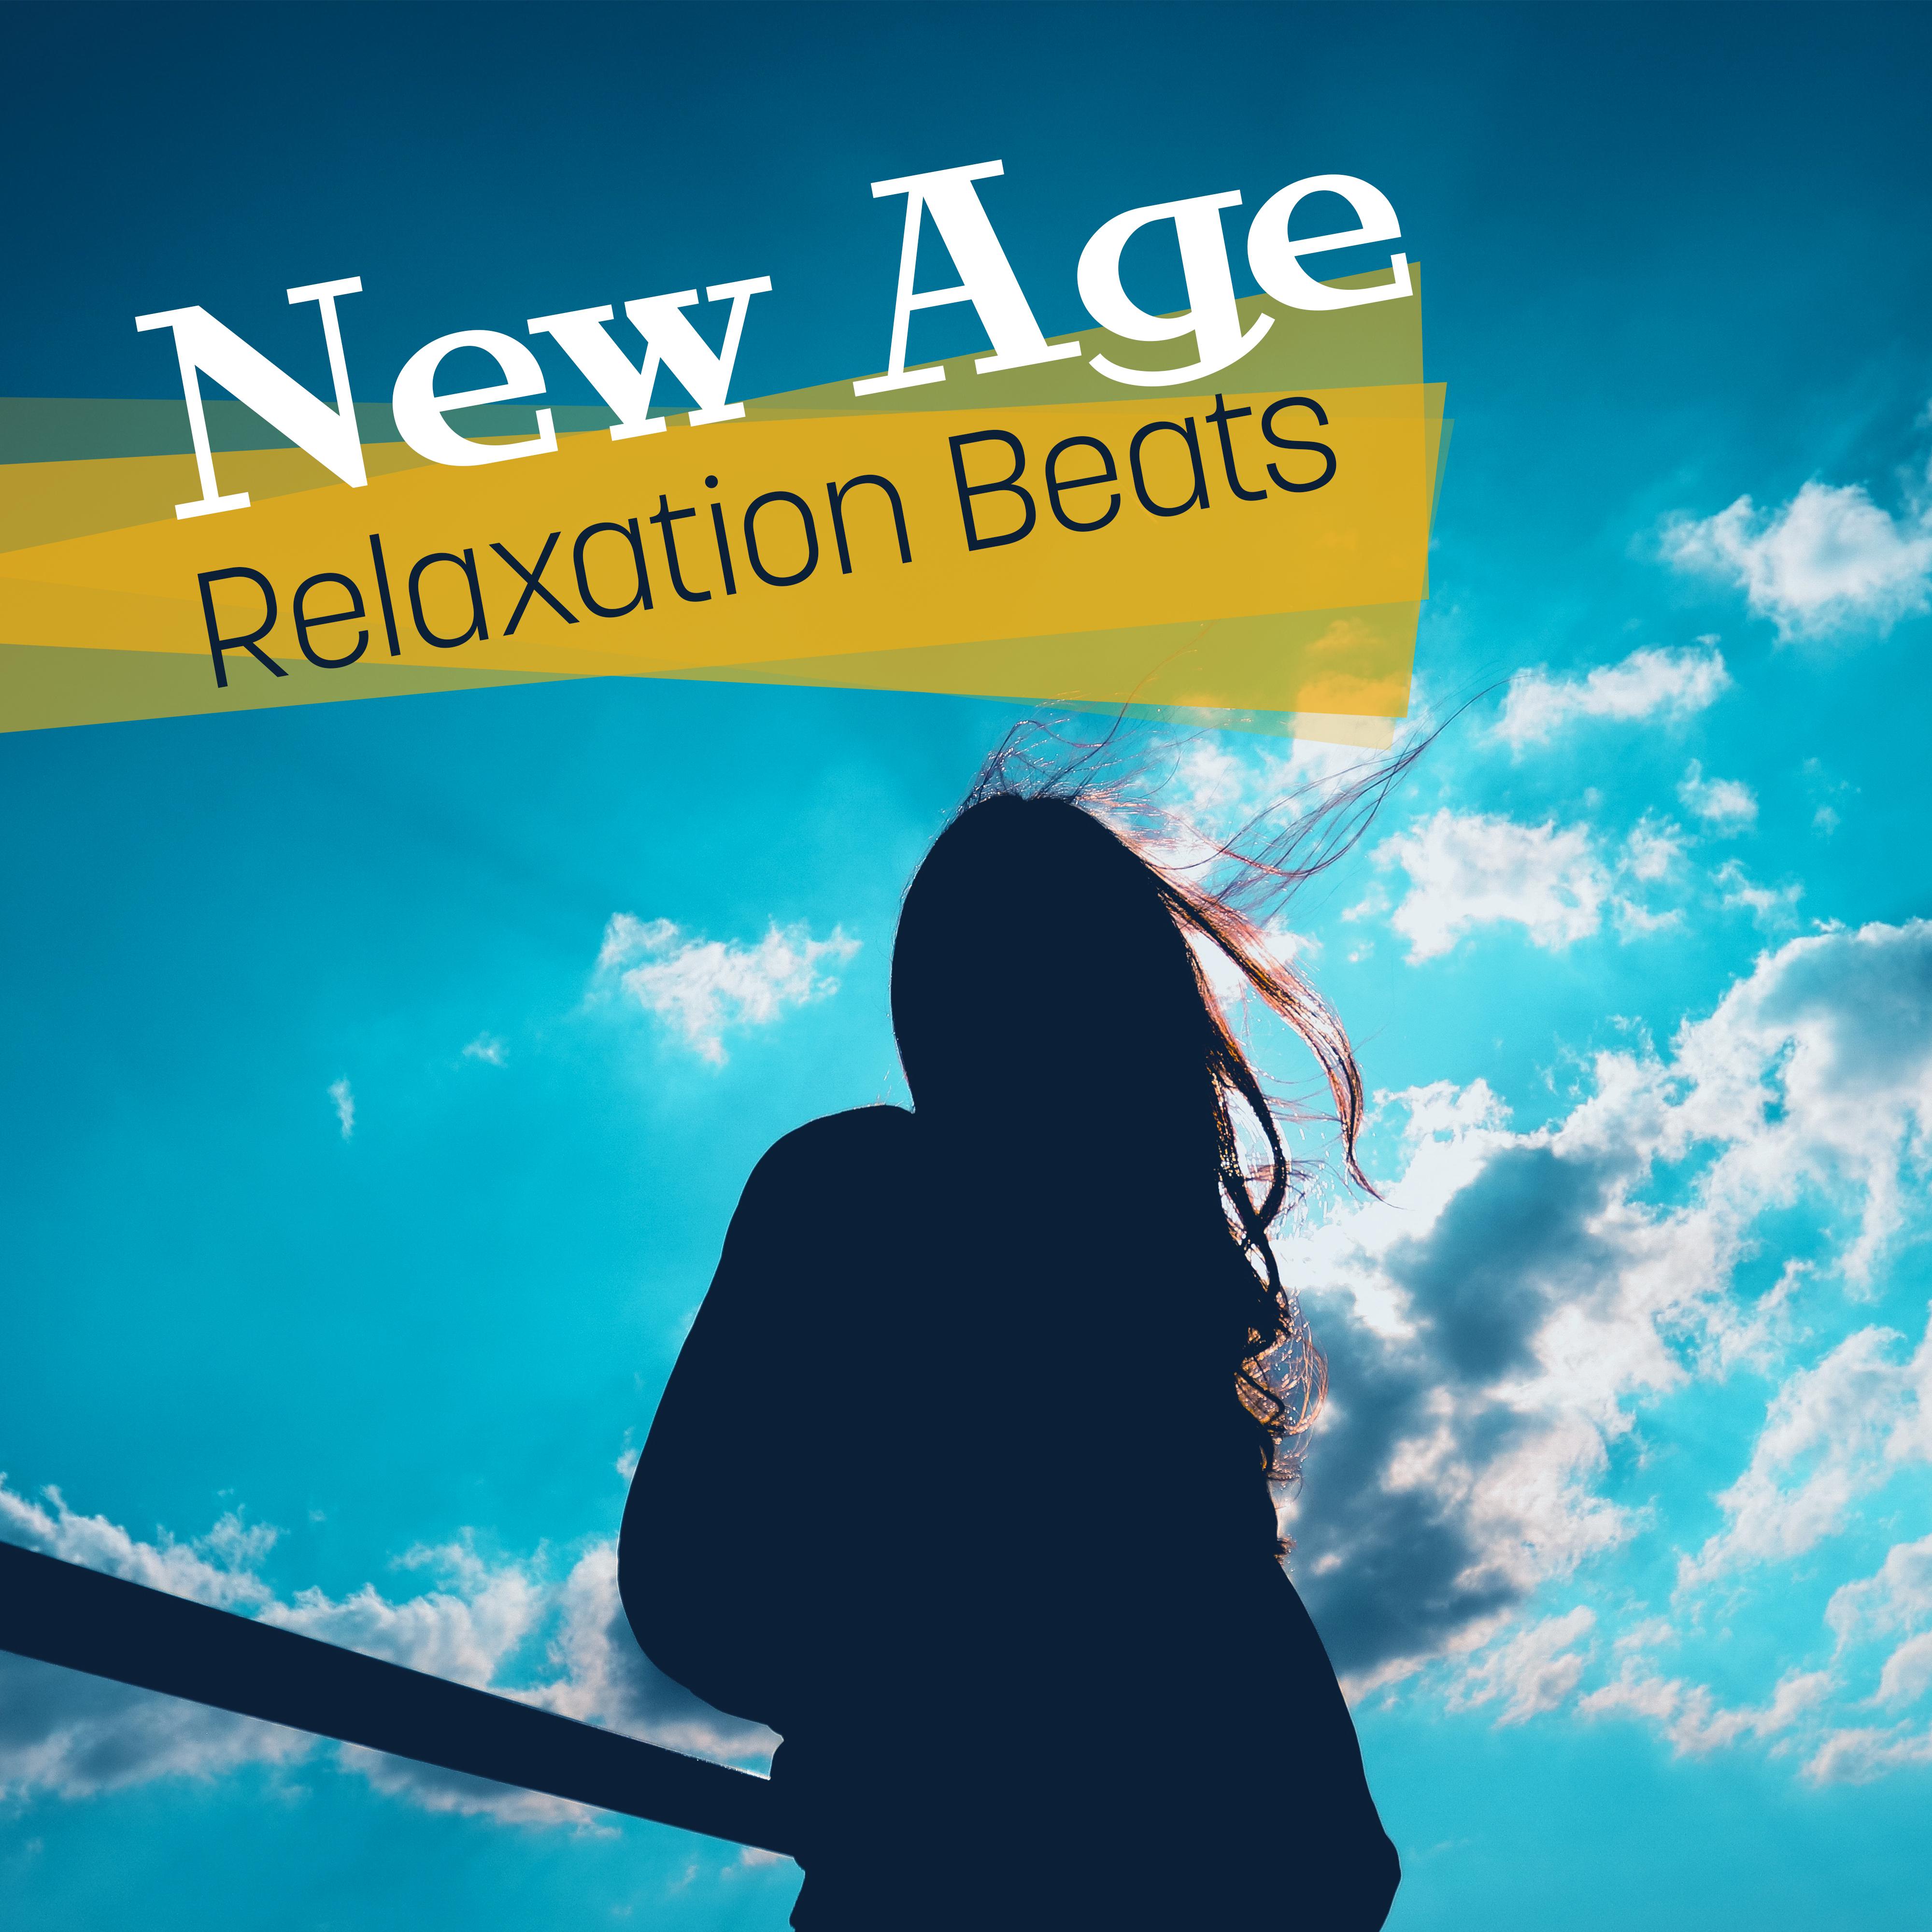 New Age Relaxation Beats